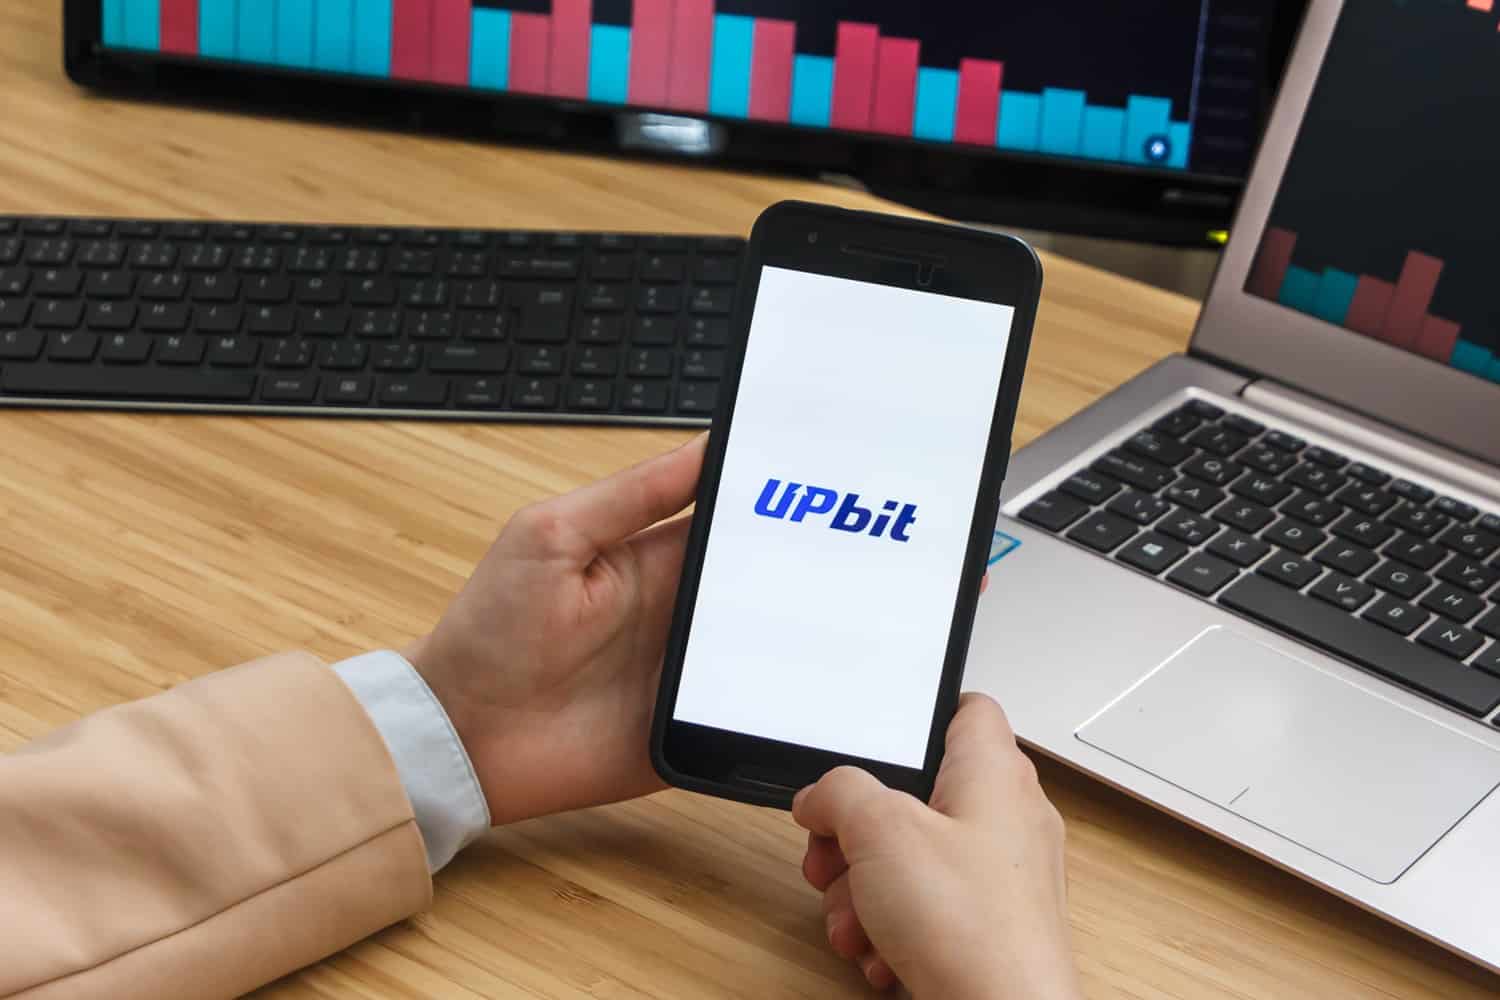 A person holds a smartphone next to two laptop screens. The smartphone displays the Upbit logo.